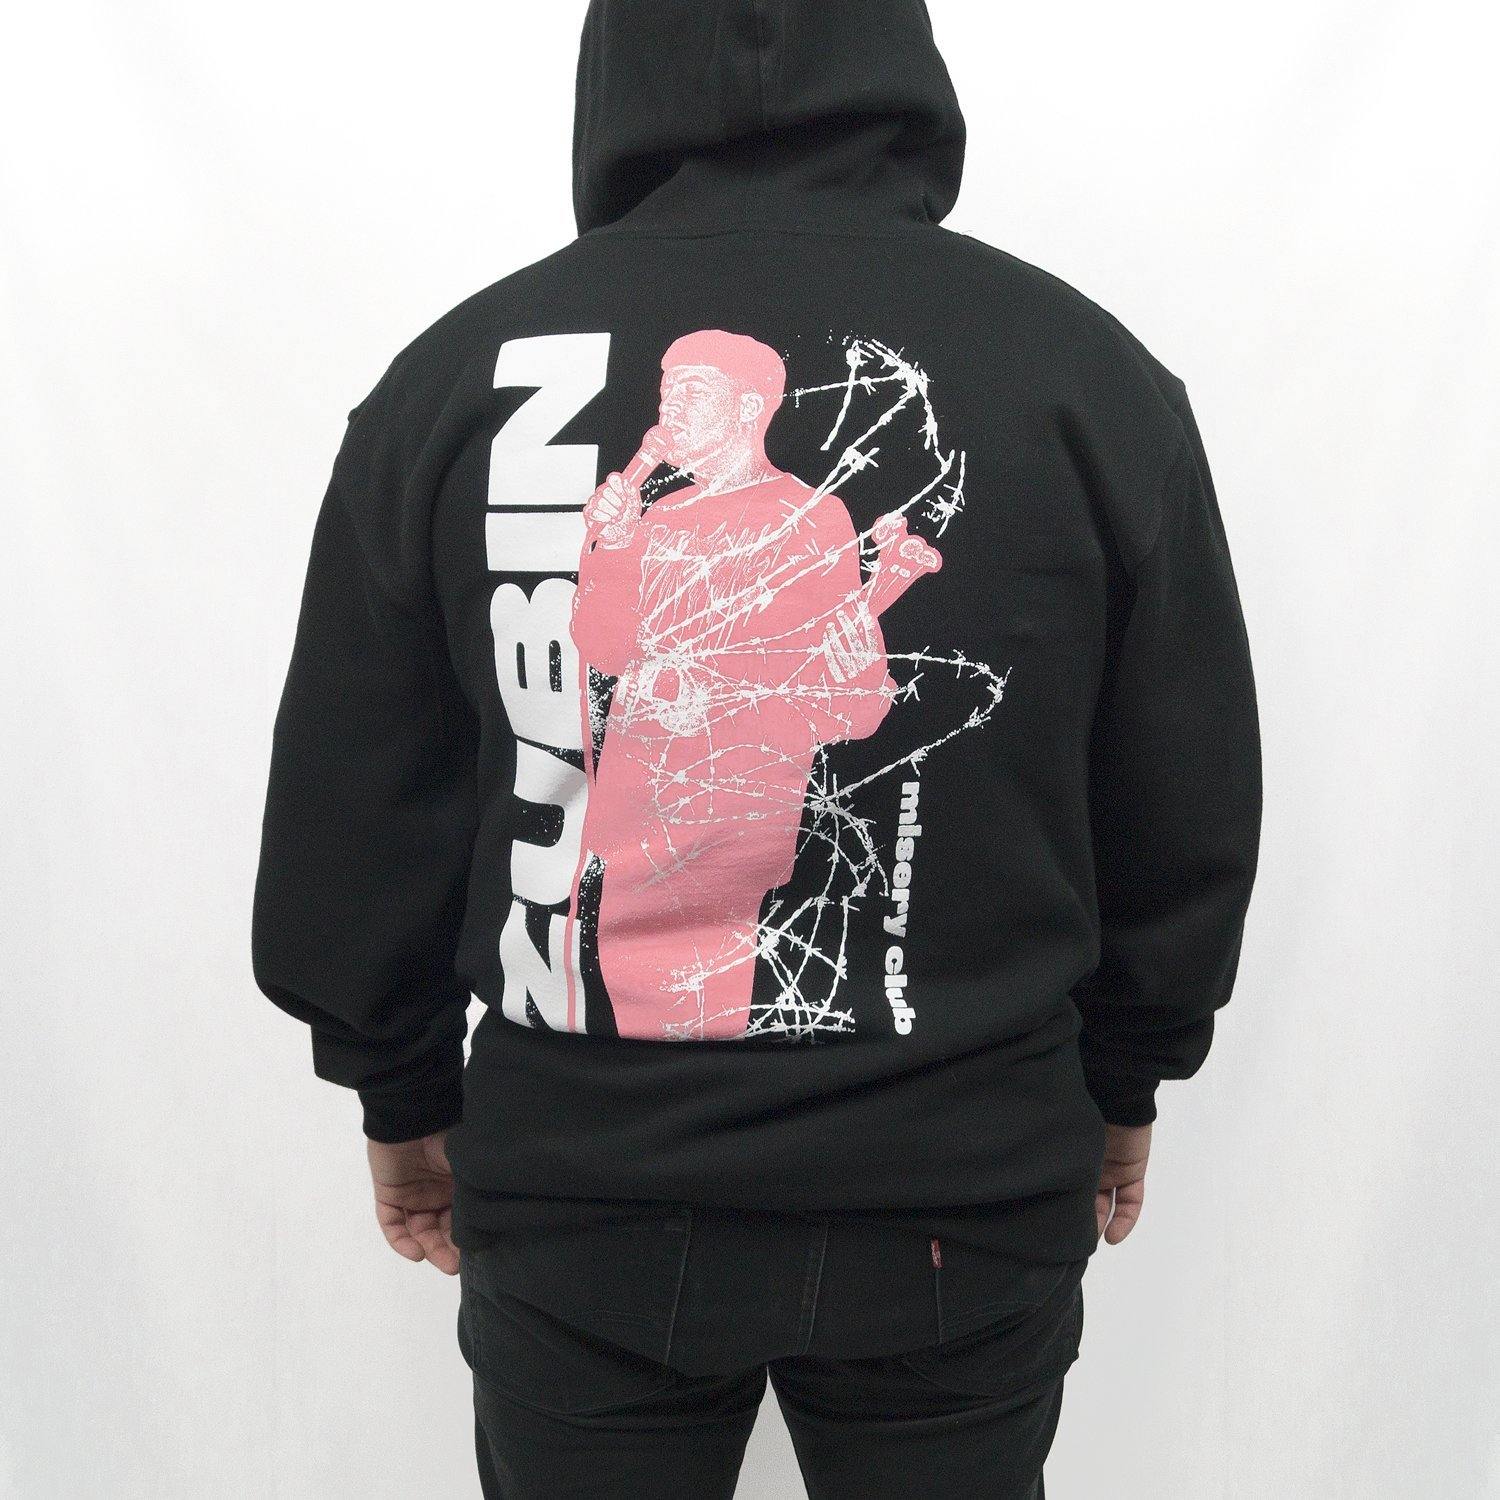 Buy – Zubin "Barbed Wire Flowers" Hoodie – Band & Music Merch – Cold Cuts Merch